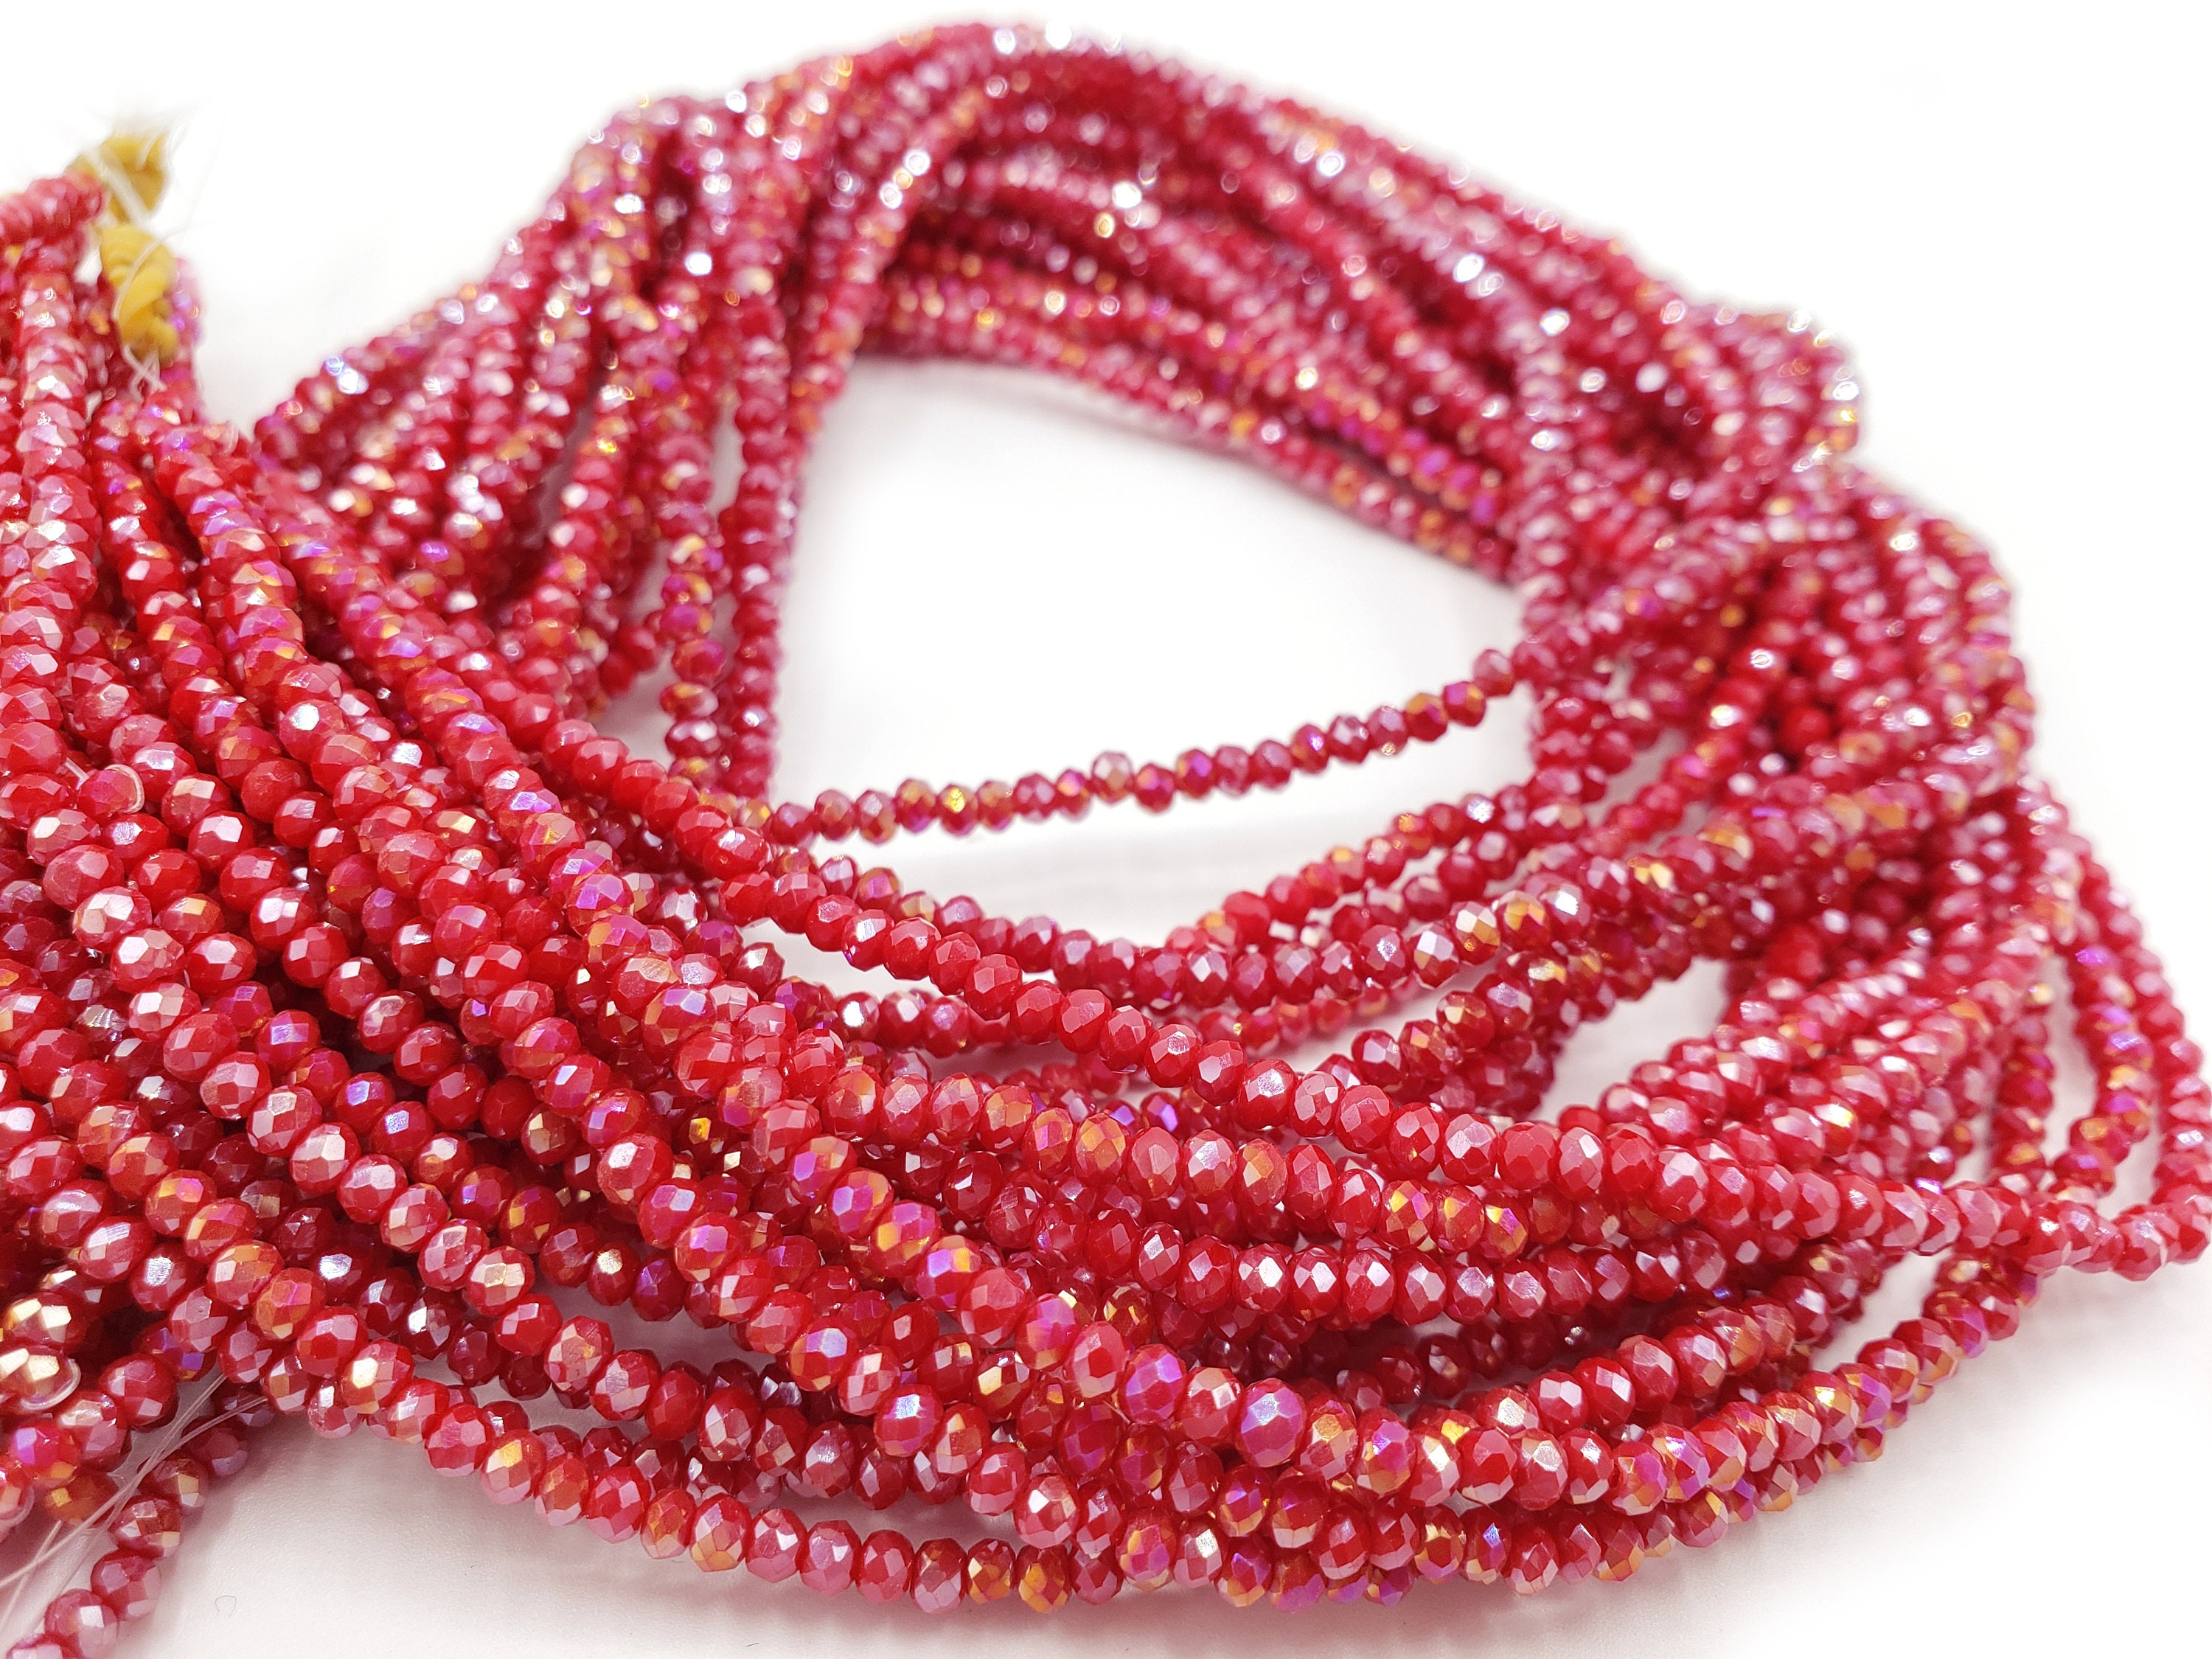 2 Pkgs Vintage Red Rocaille Beads Sulyn 60 Gr. Crafts Jewelry 